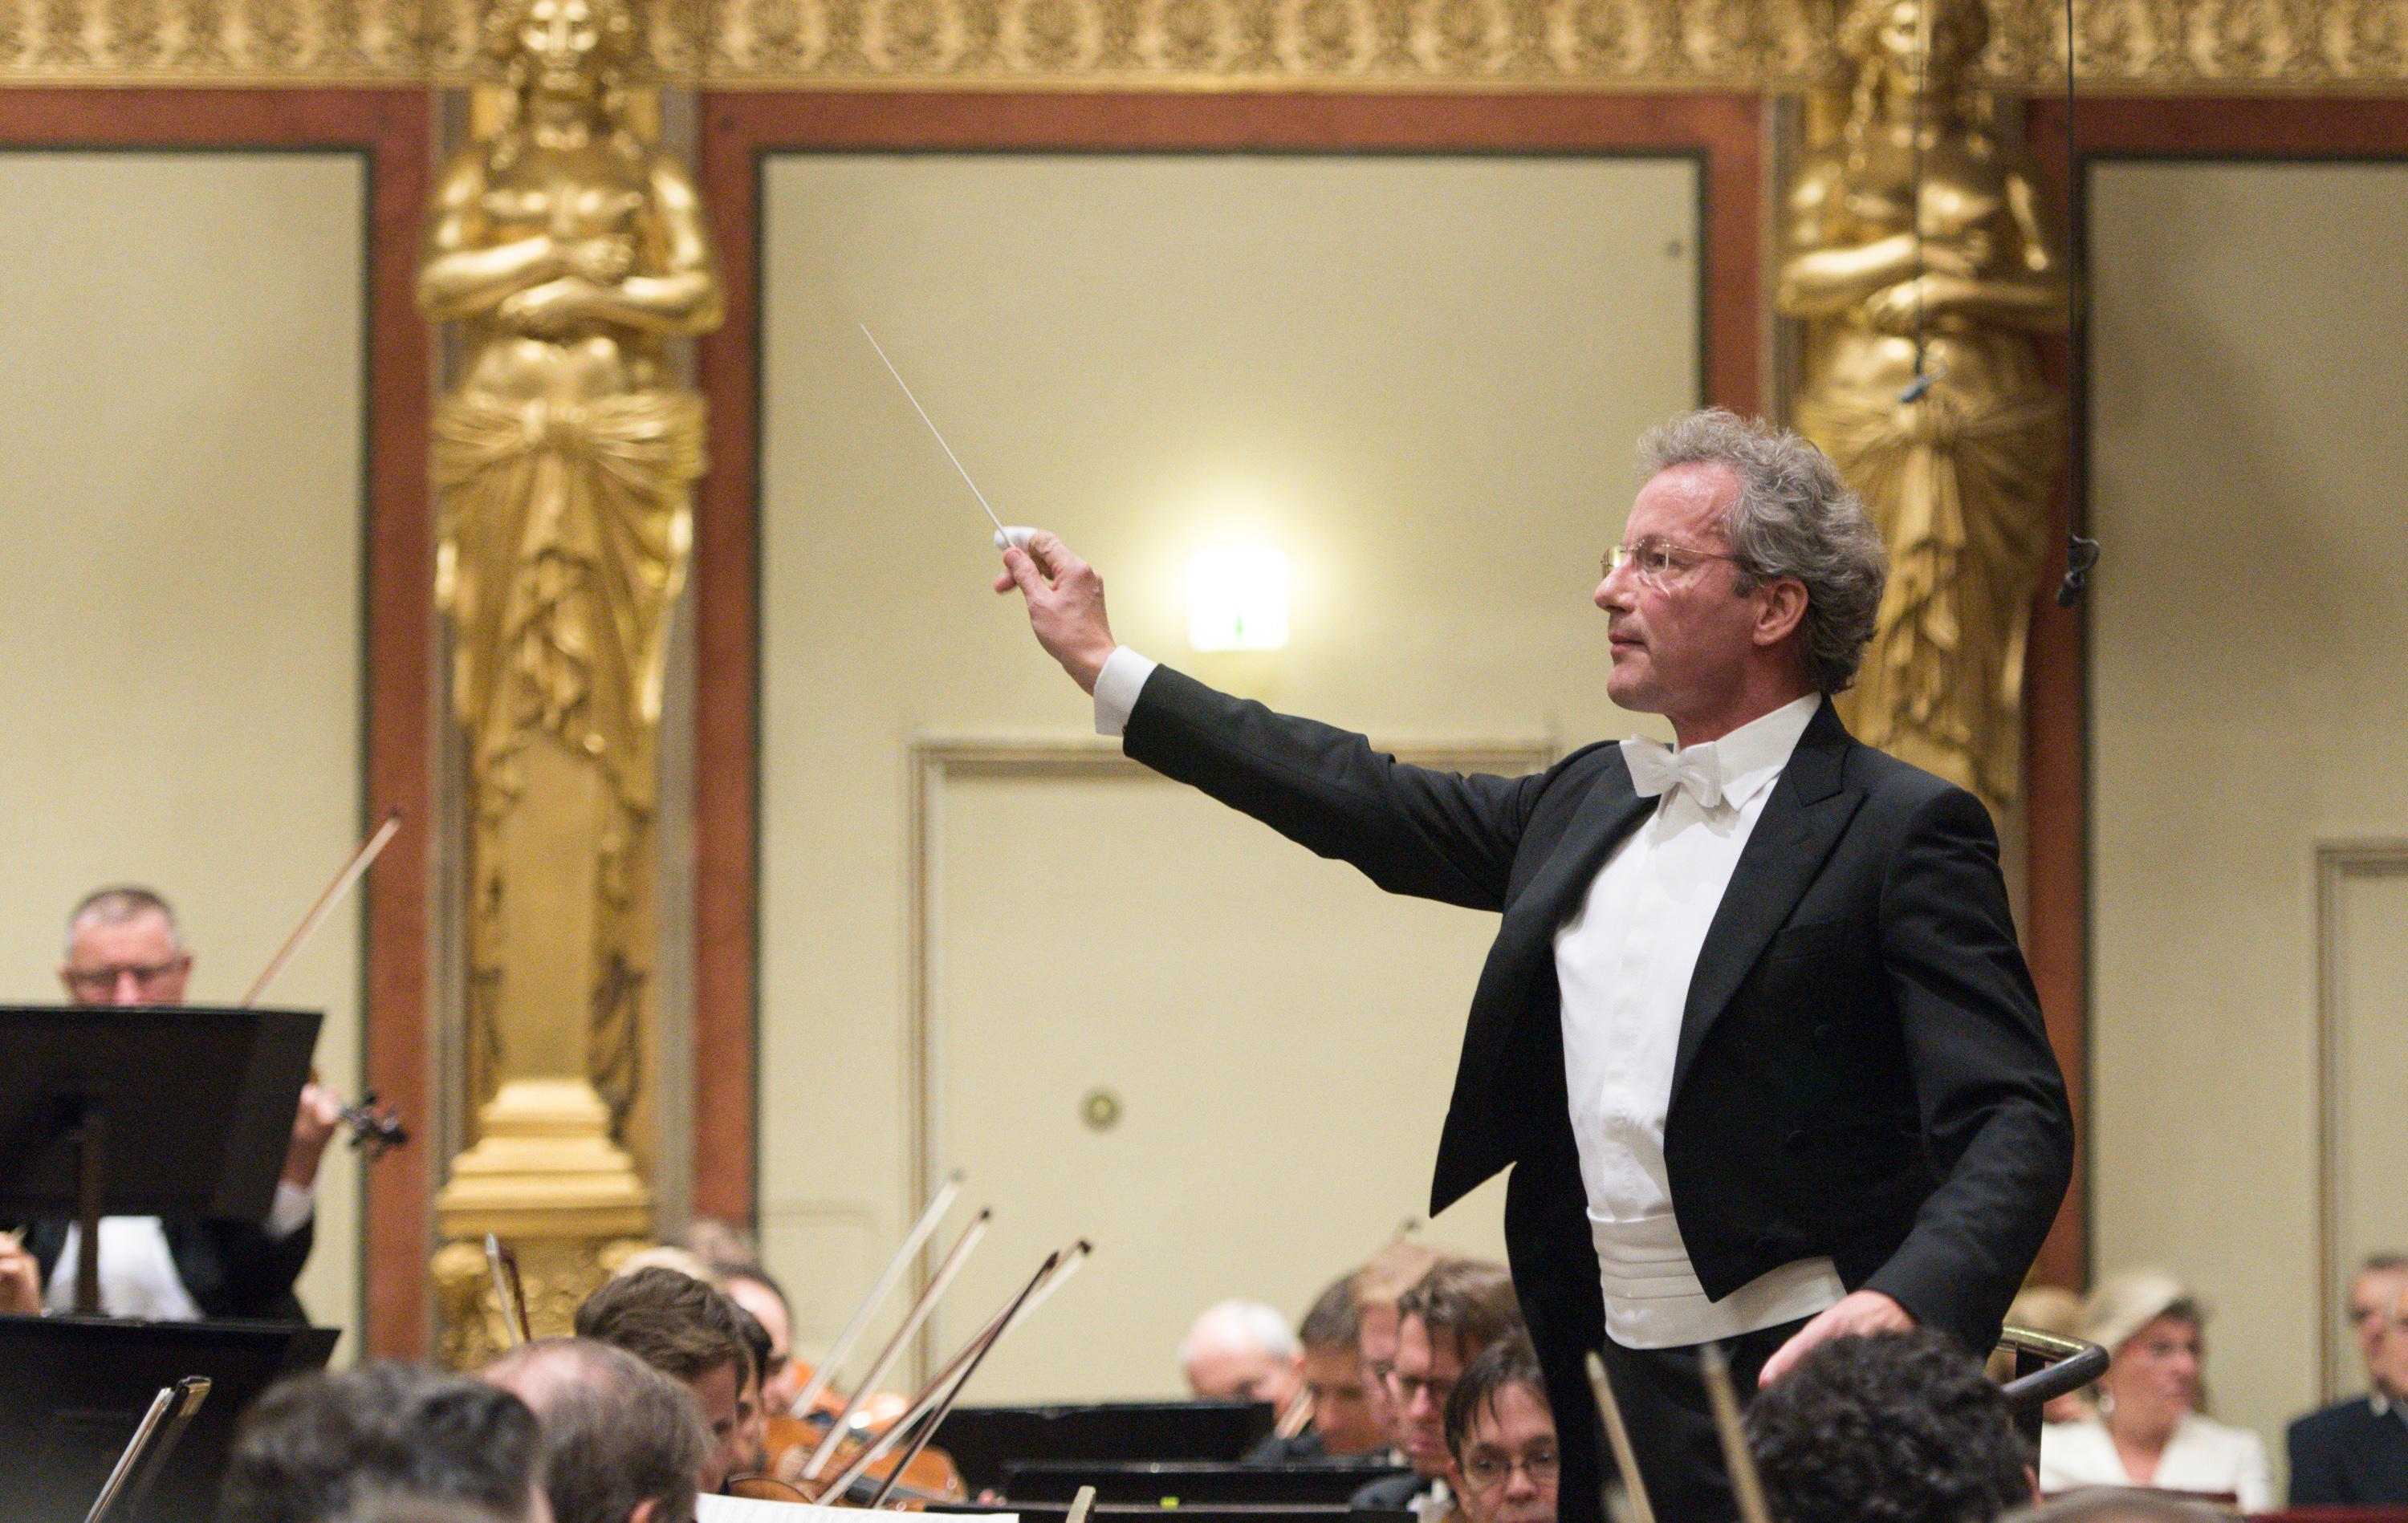 After an 11-year hiatus, the internationally renowned Vienna Philharmonic Orchestra is returning to Hong Kong to stage two concerts, on October 24 and 25 respectively, by invitation from the Leisure and Cultural Services Department. Photo shows guest conductor of the Vienna Philharmonic Orchestra Franz Welser-Möst. (Source of photo: Terry Linke)